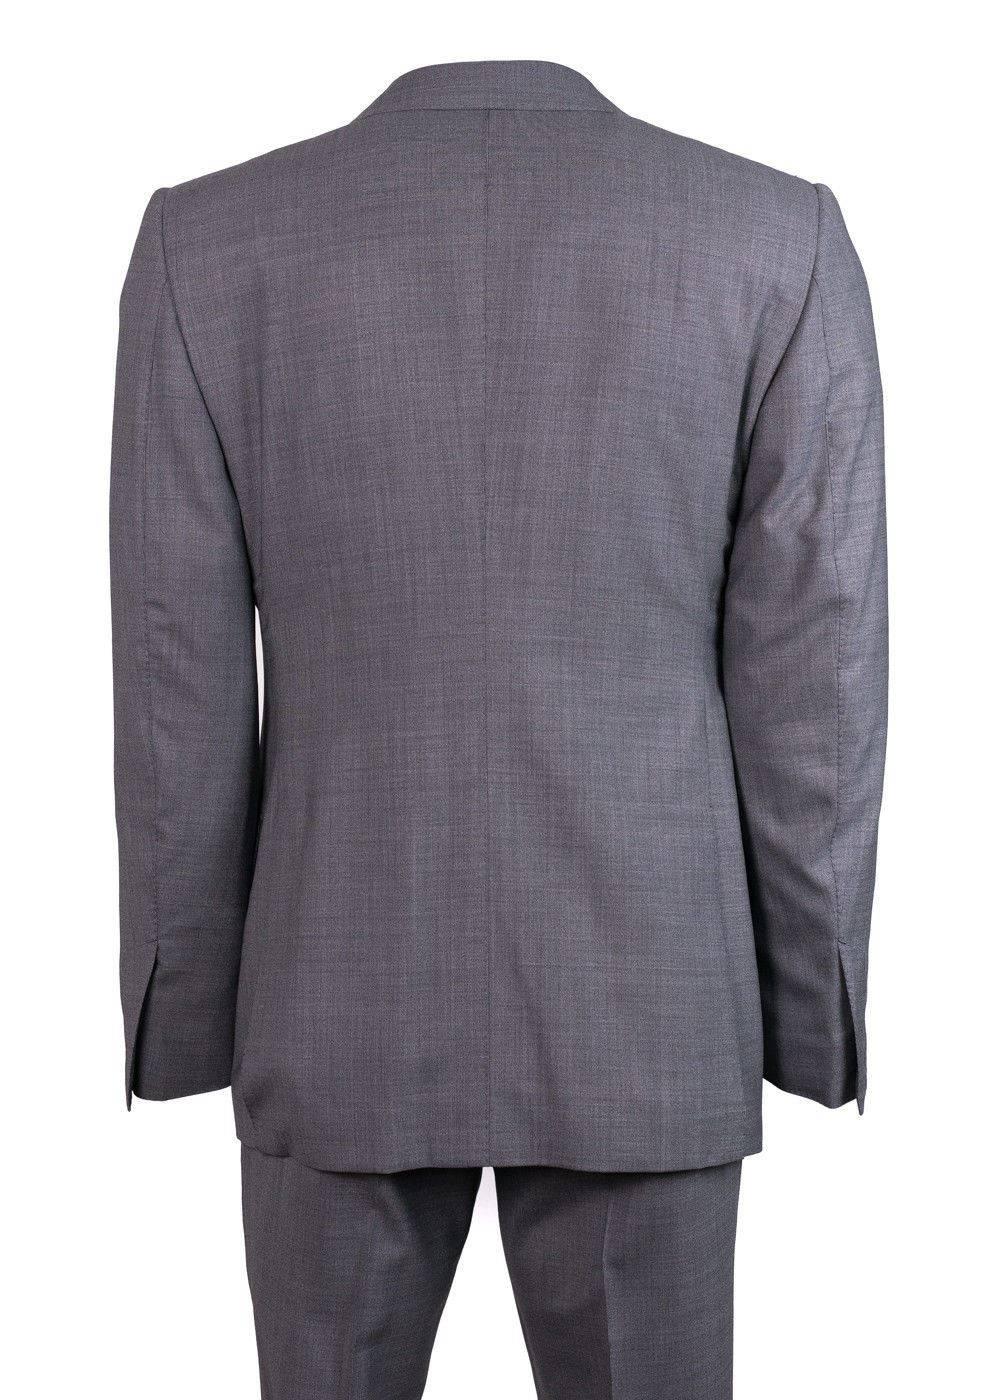 Brand New Tom Ford Chambray Windsor 2-Piece Suit
Original Tags & Hanger Included
Retails in Stores & Online for $5460
Men's Size EUR 46 R / US 36 R Fits True to Size

Assume the calm air of the Modern Tom Ford man in your Winsdor suit. This high